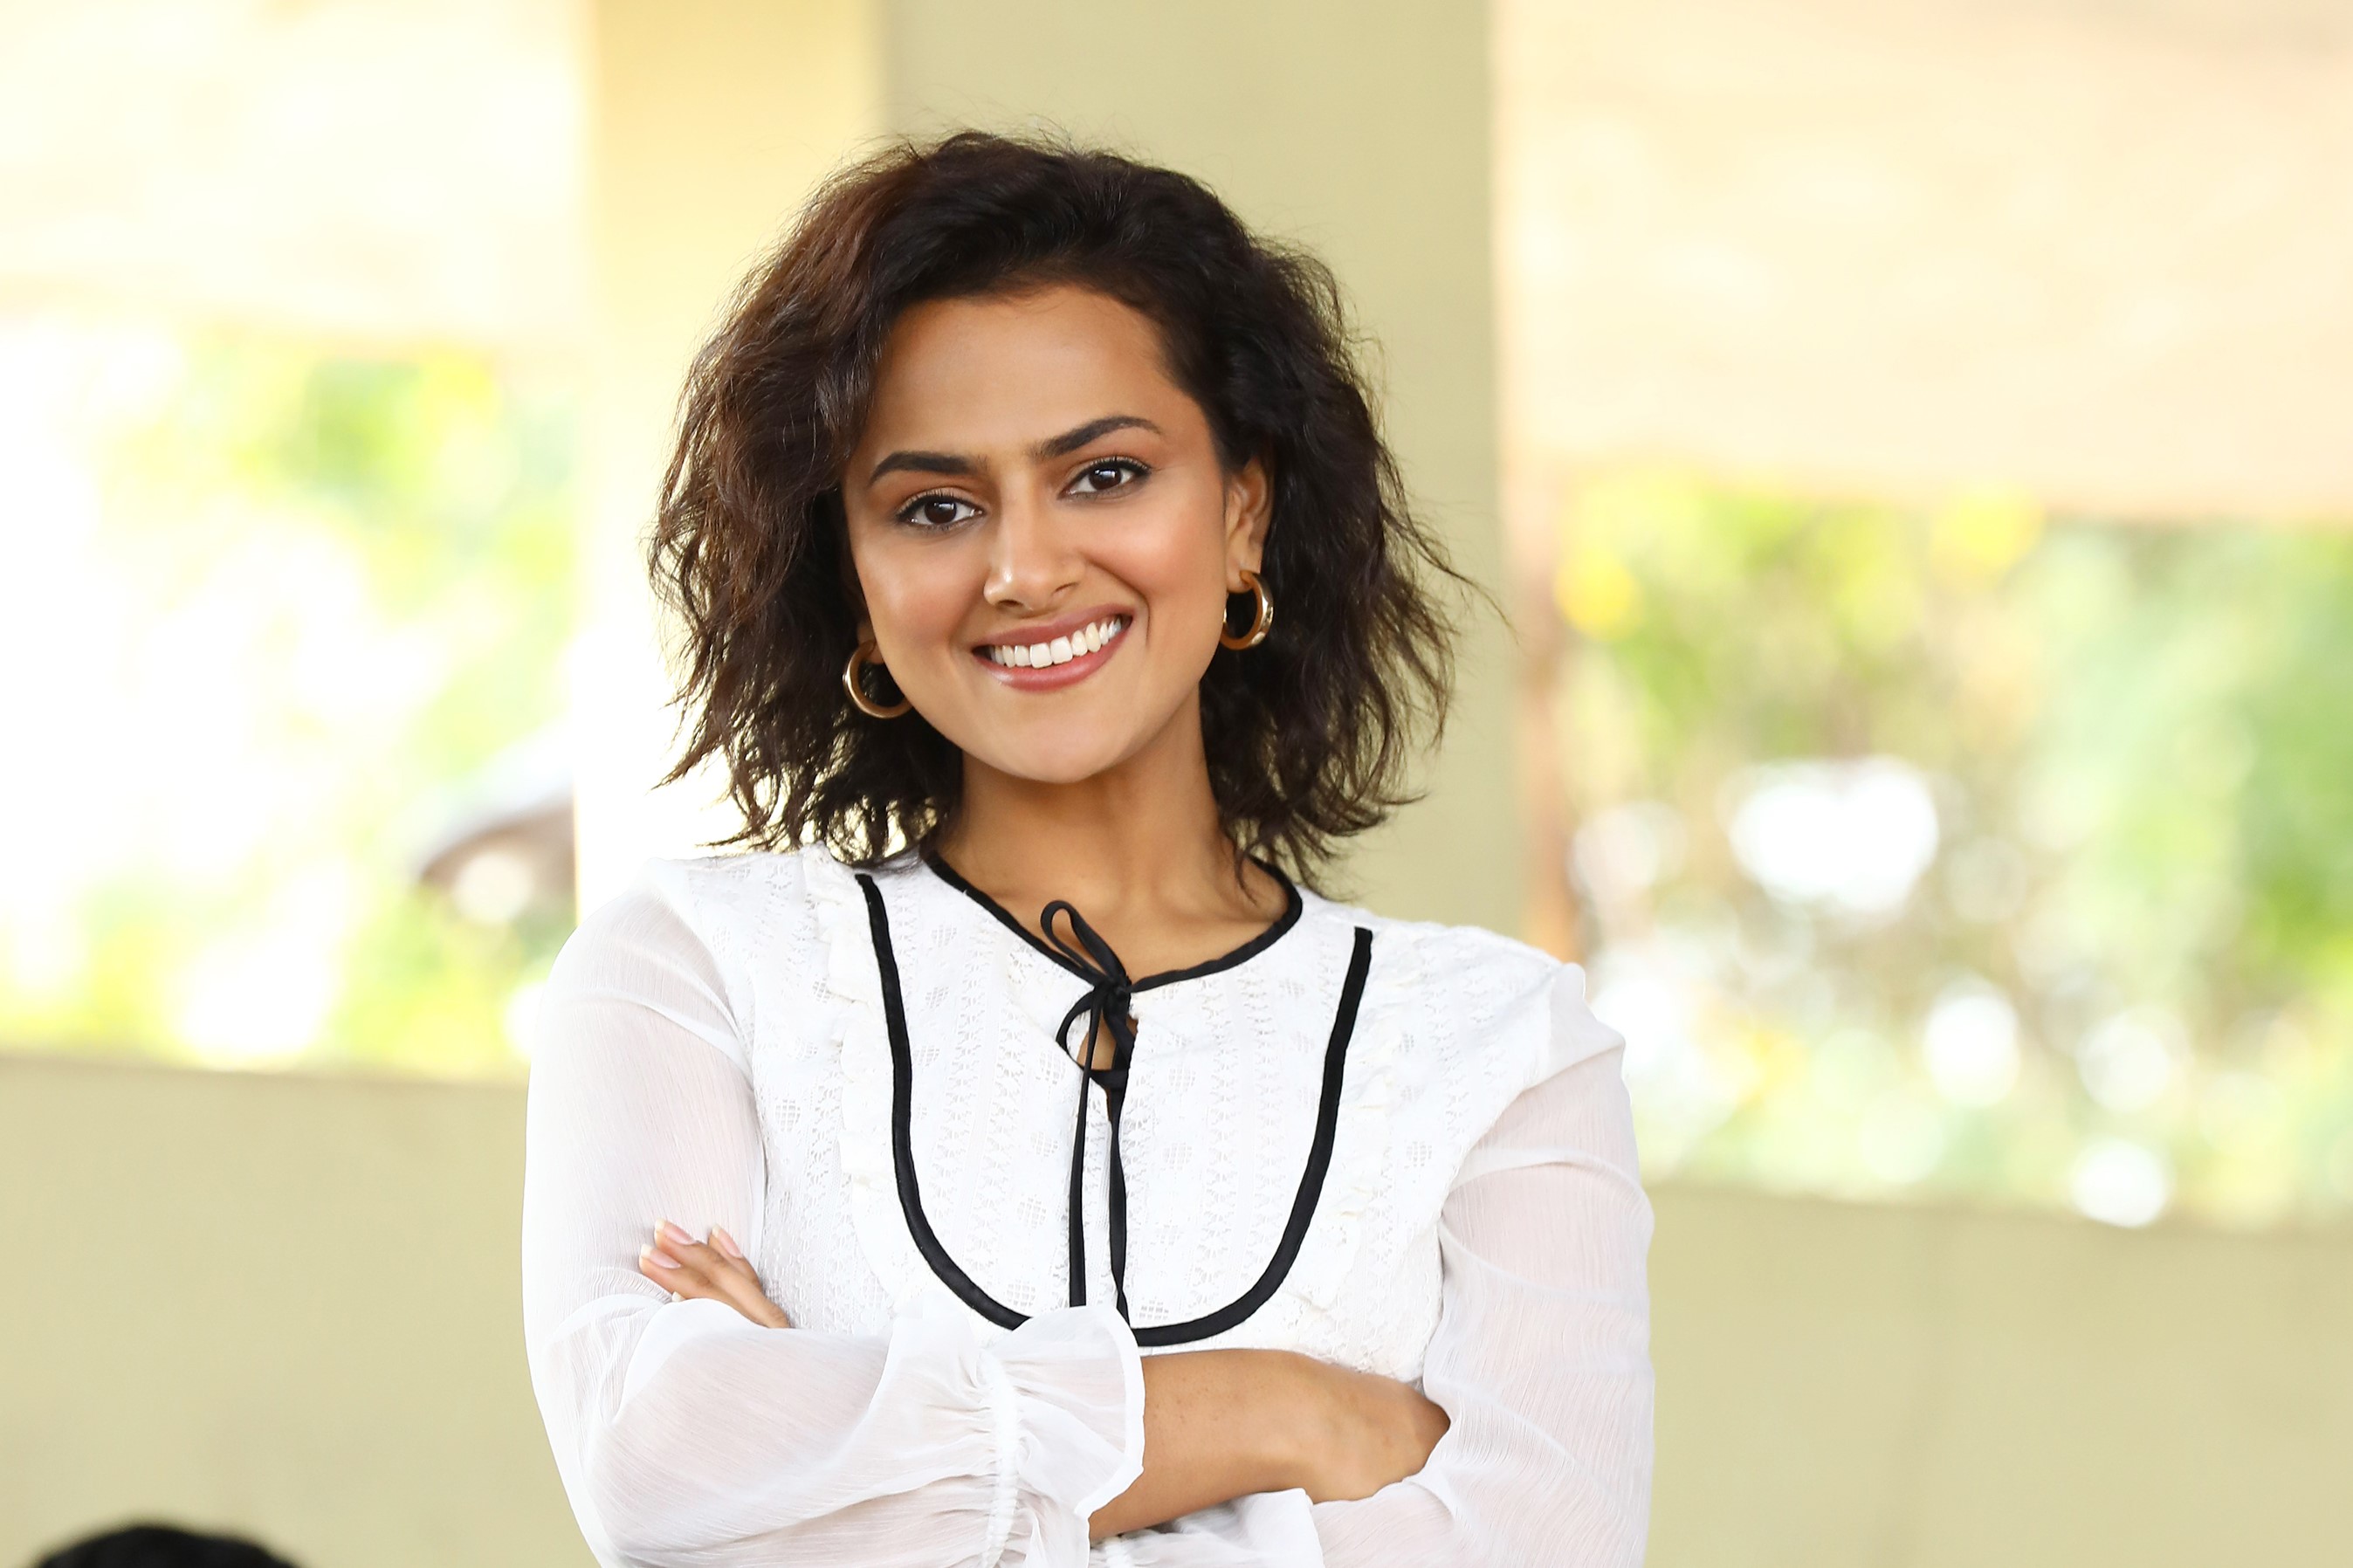 'Jersey' is filled with honest emotion- Shraddha Srinath 